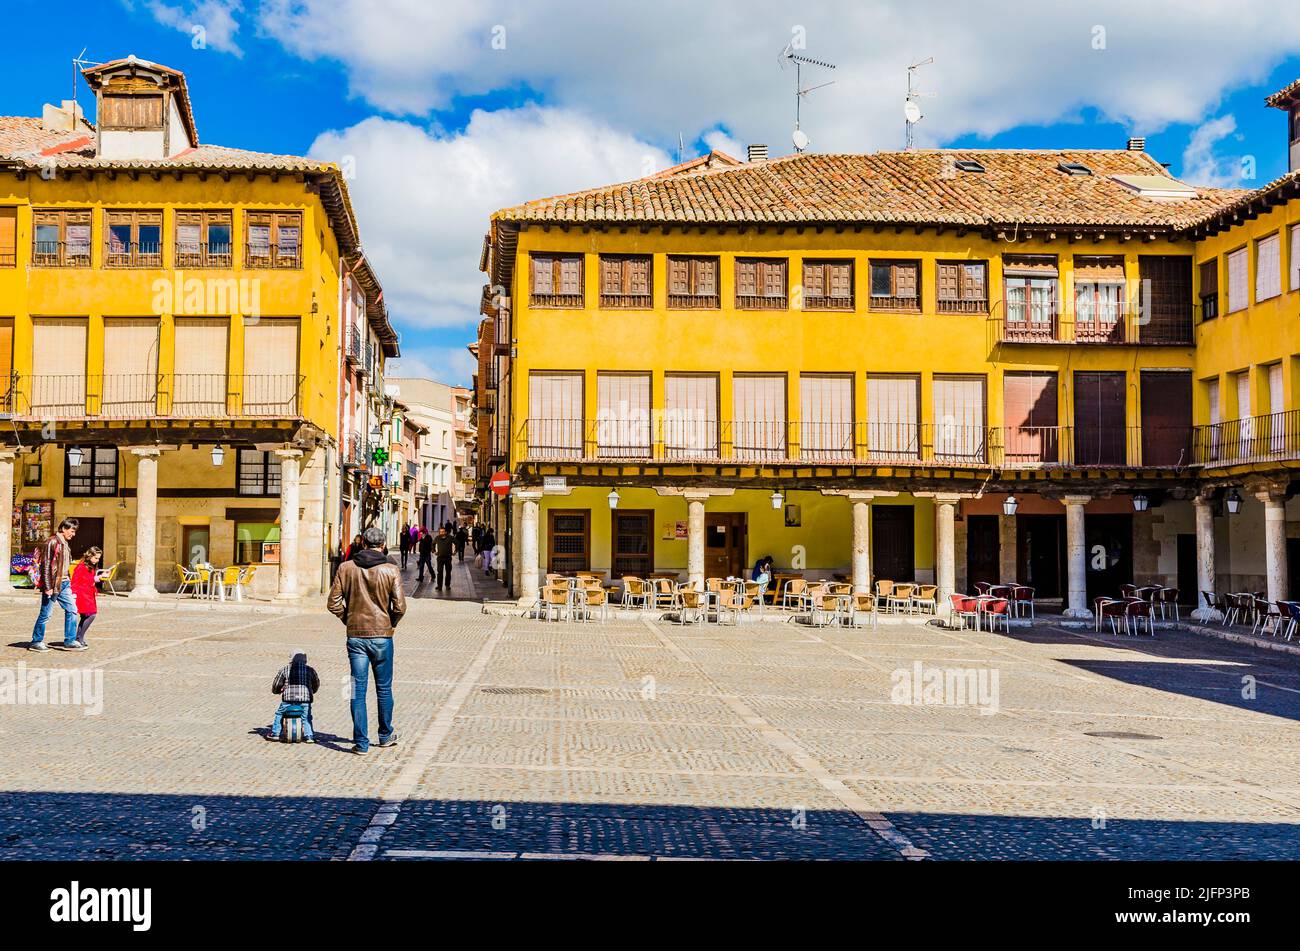 The Plaza Mayor, main square, is the historic central community space framed by the 17th century colonnade and porticos creating the arcade that encir Stock Photo